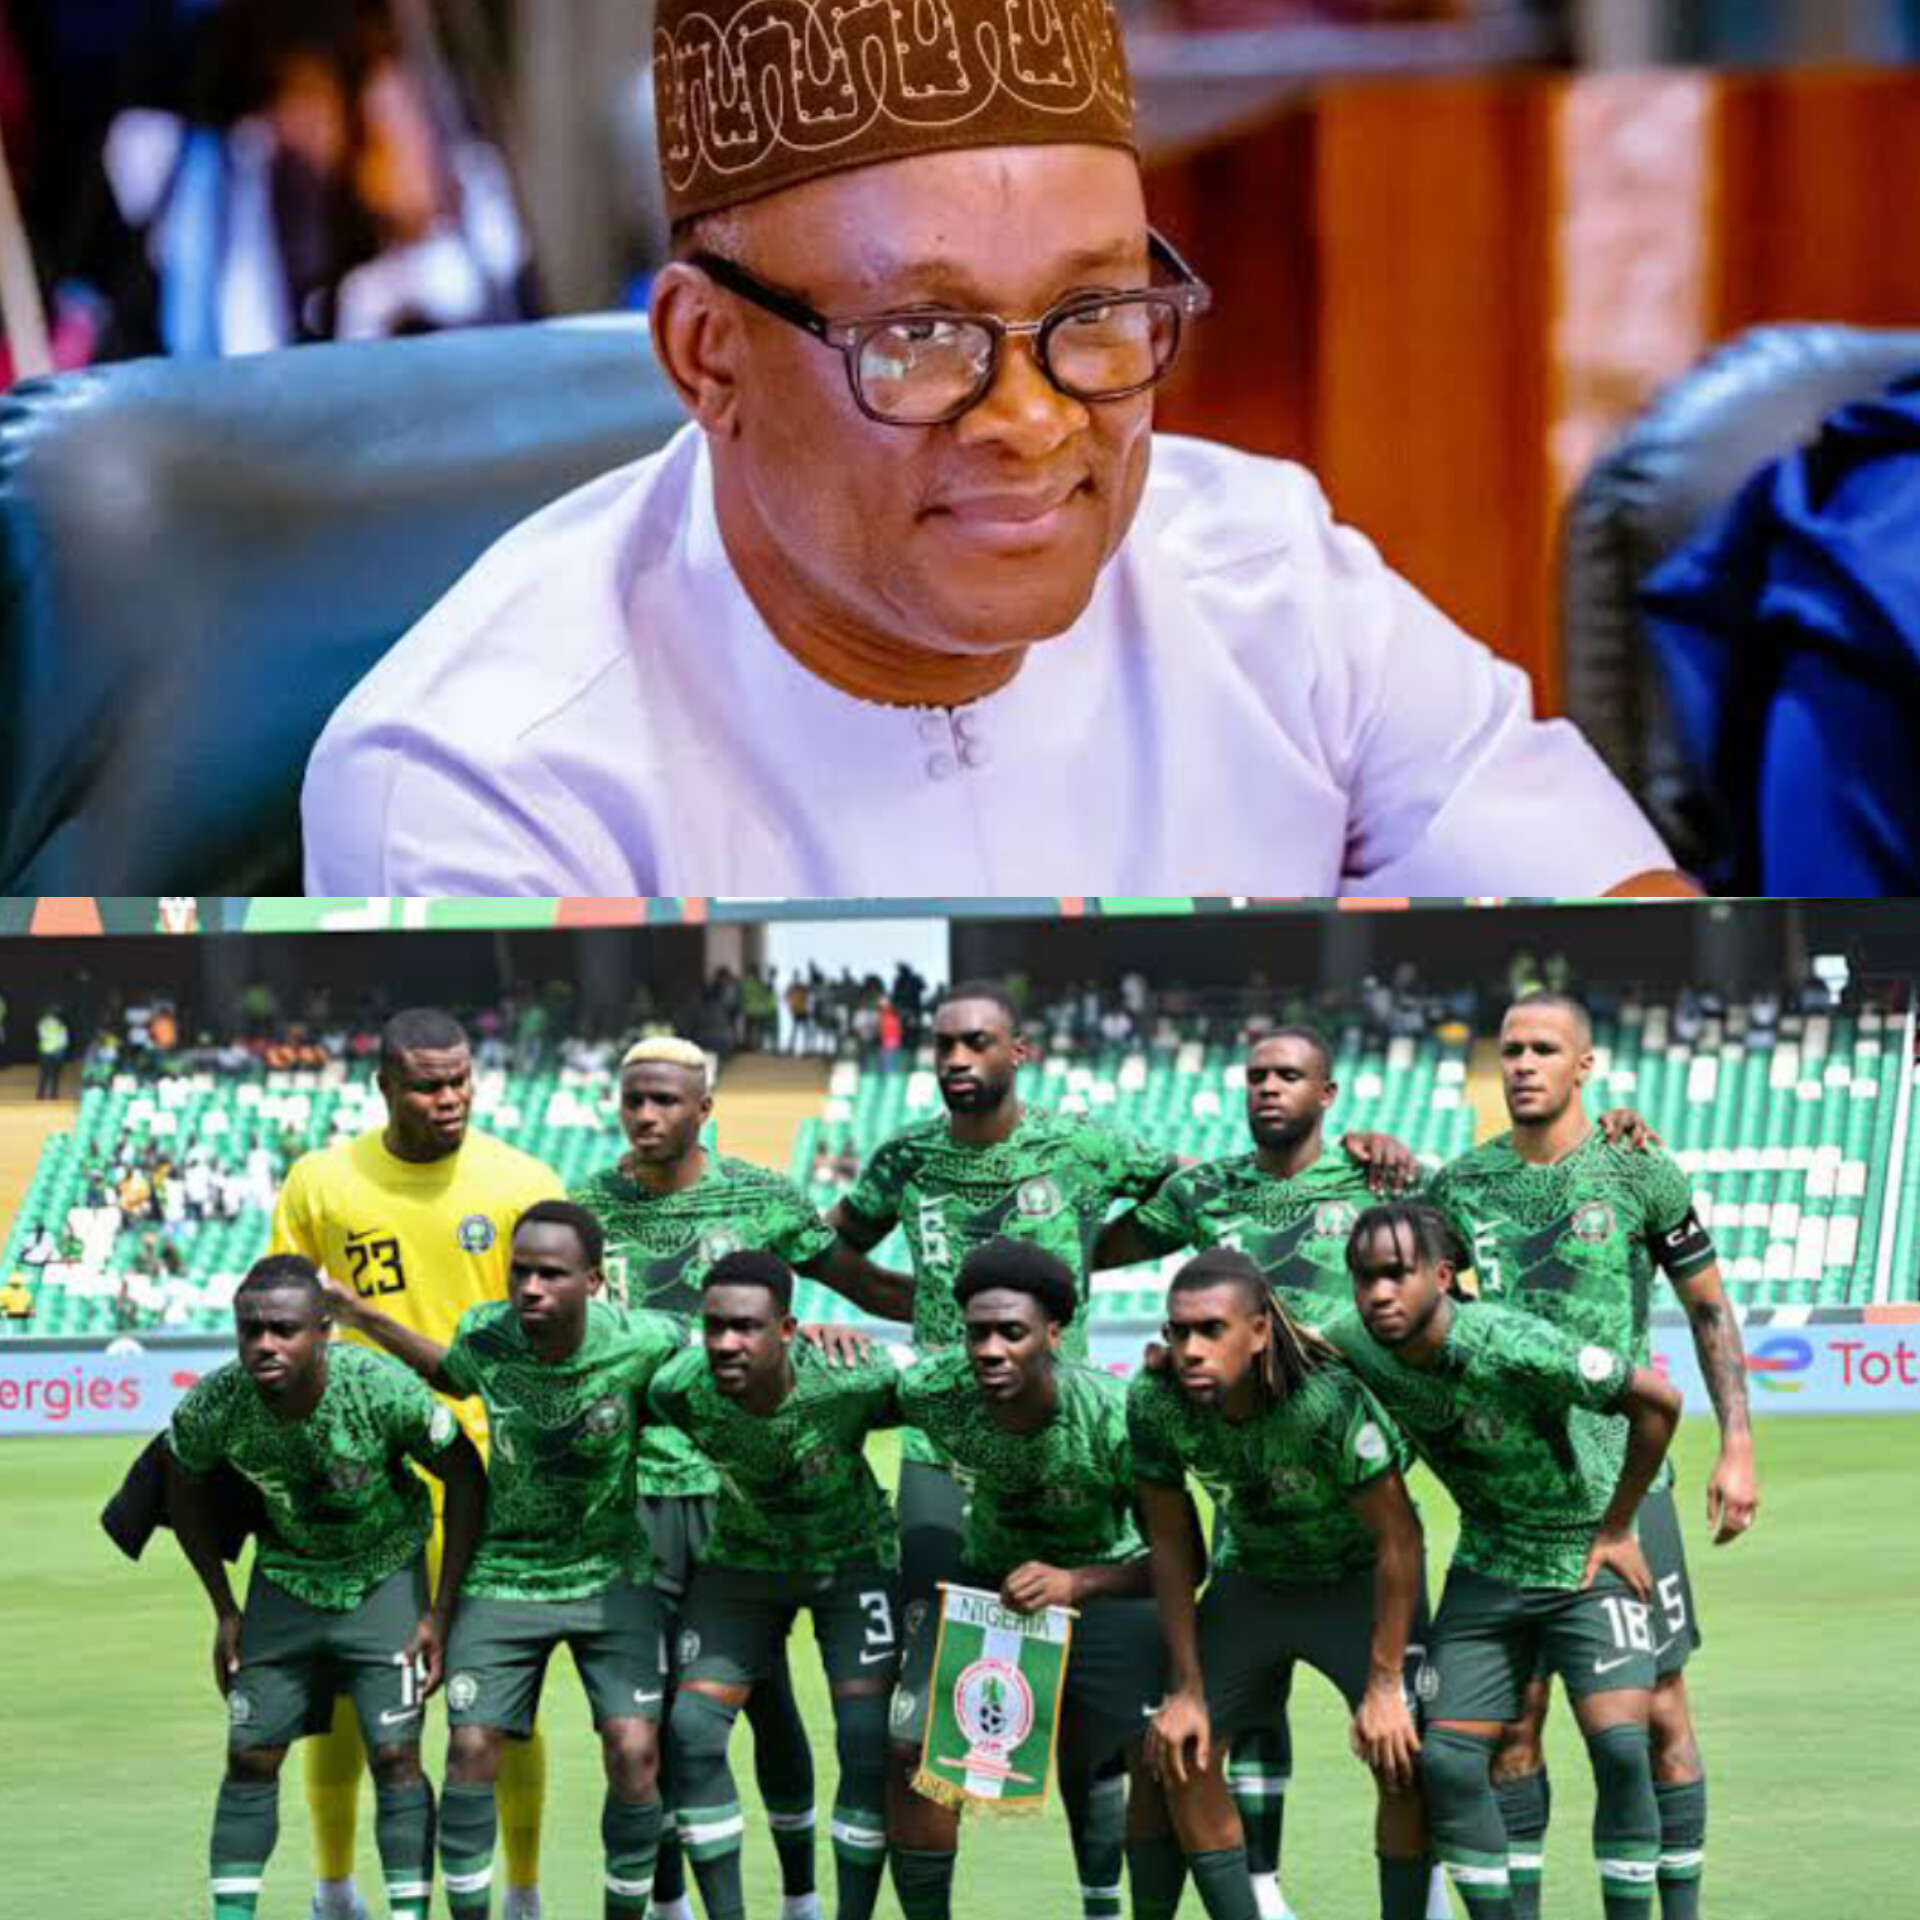 2026 World Cup Qualifying Sports minister summons NFF over Super